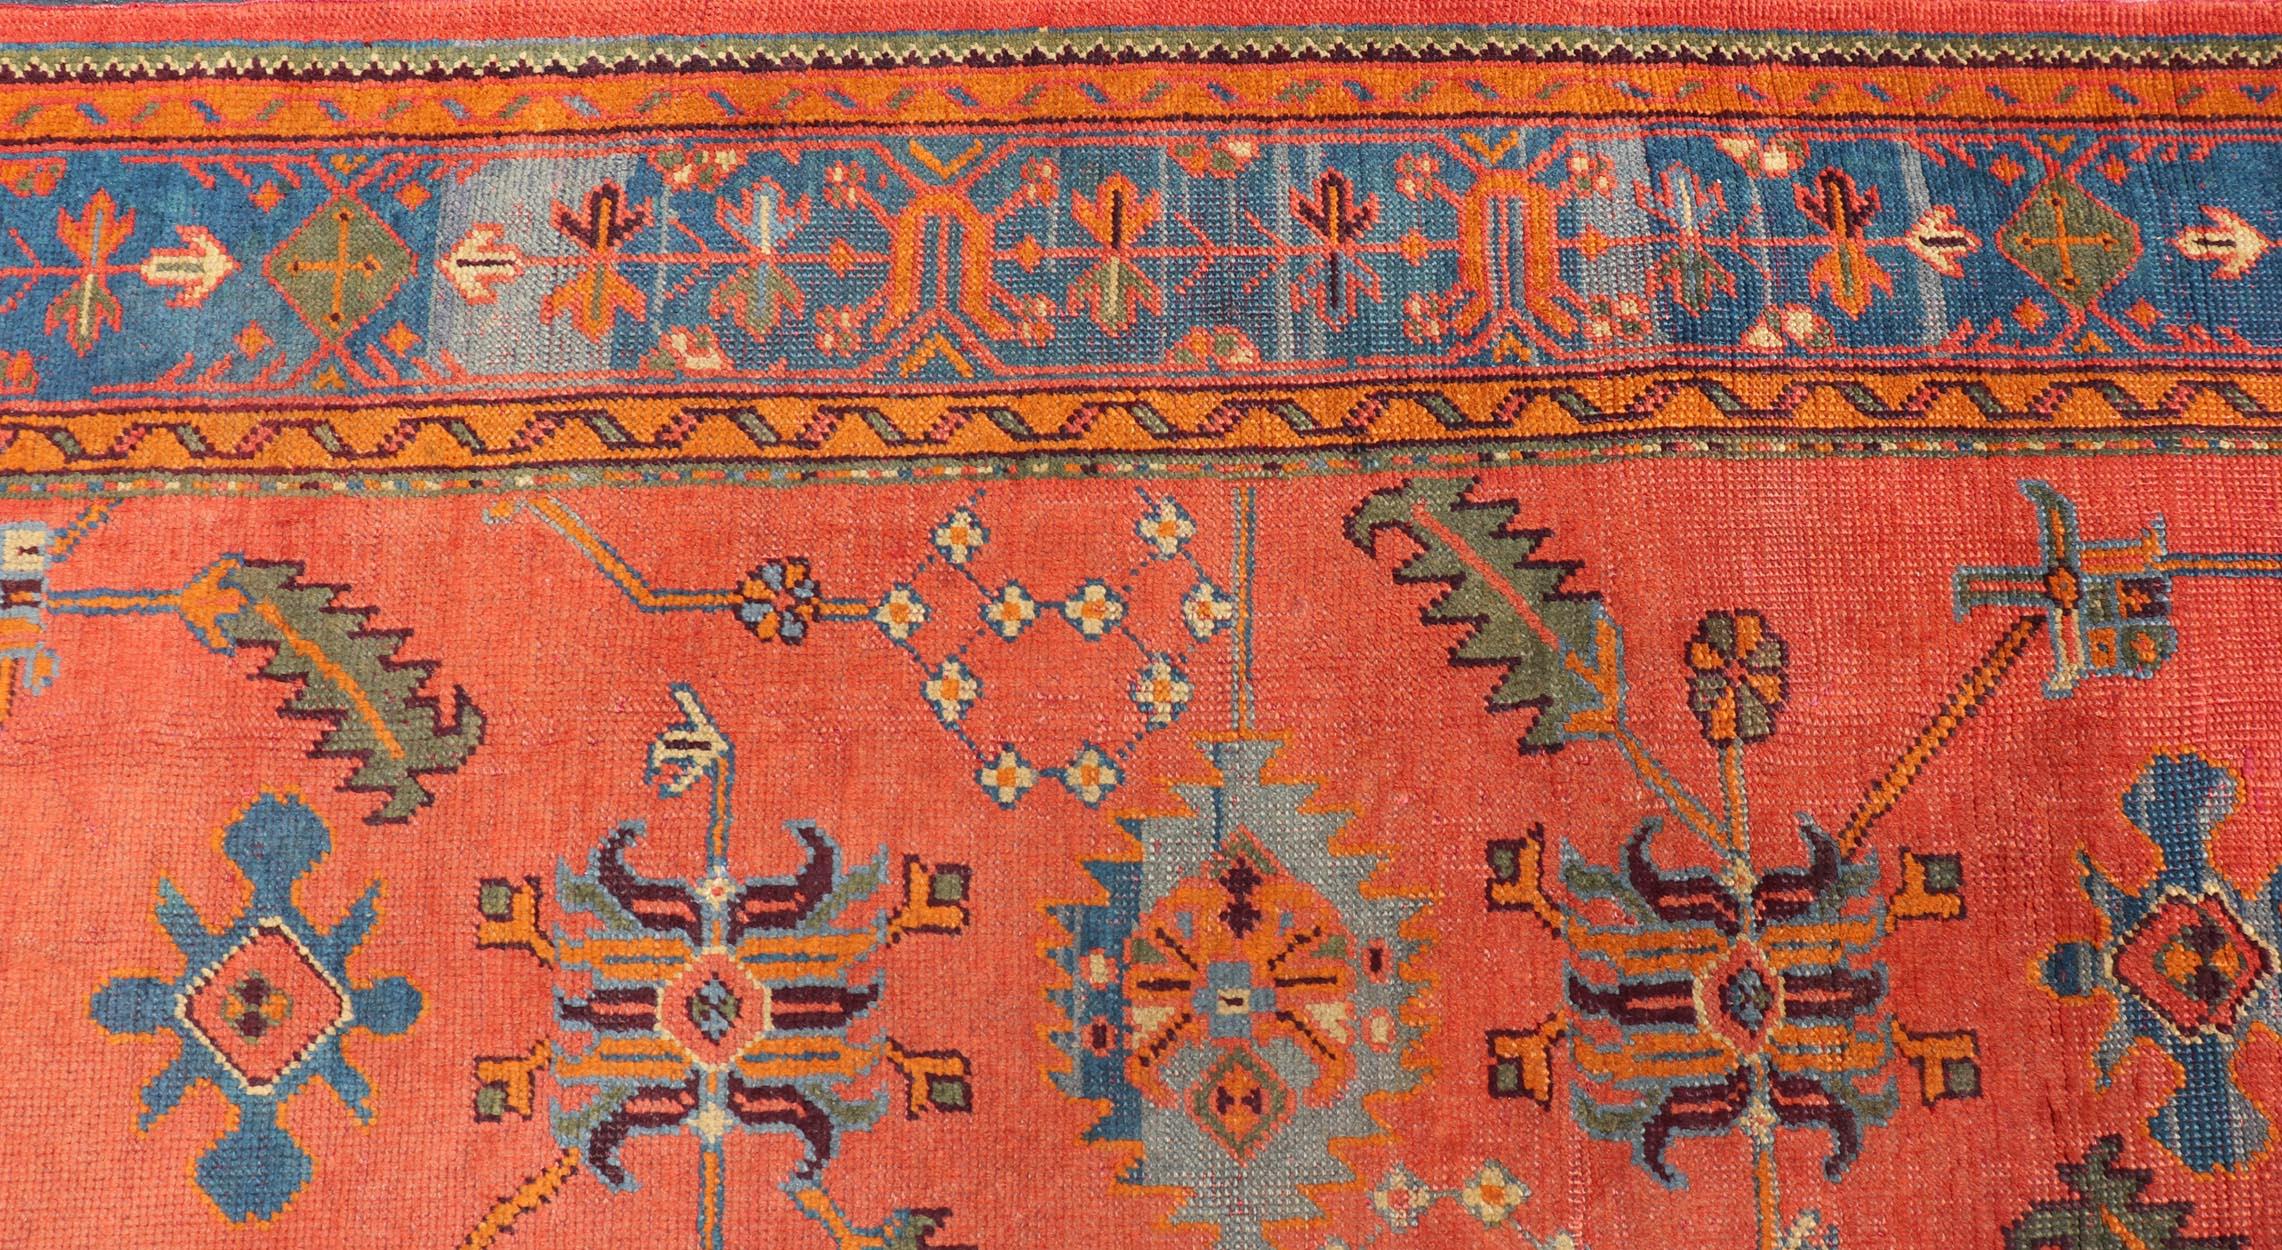 Antique Turkish Oushak Colorful Rug With All-Over Design In Salmon and Blue's  For Sale 1